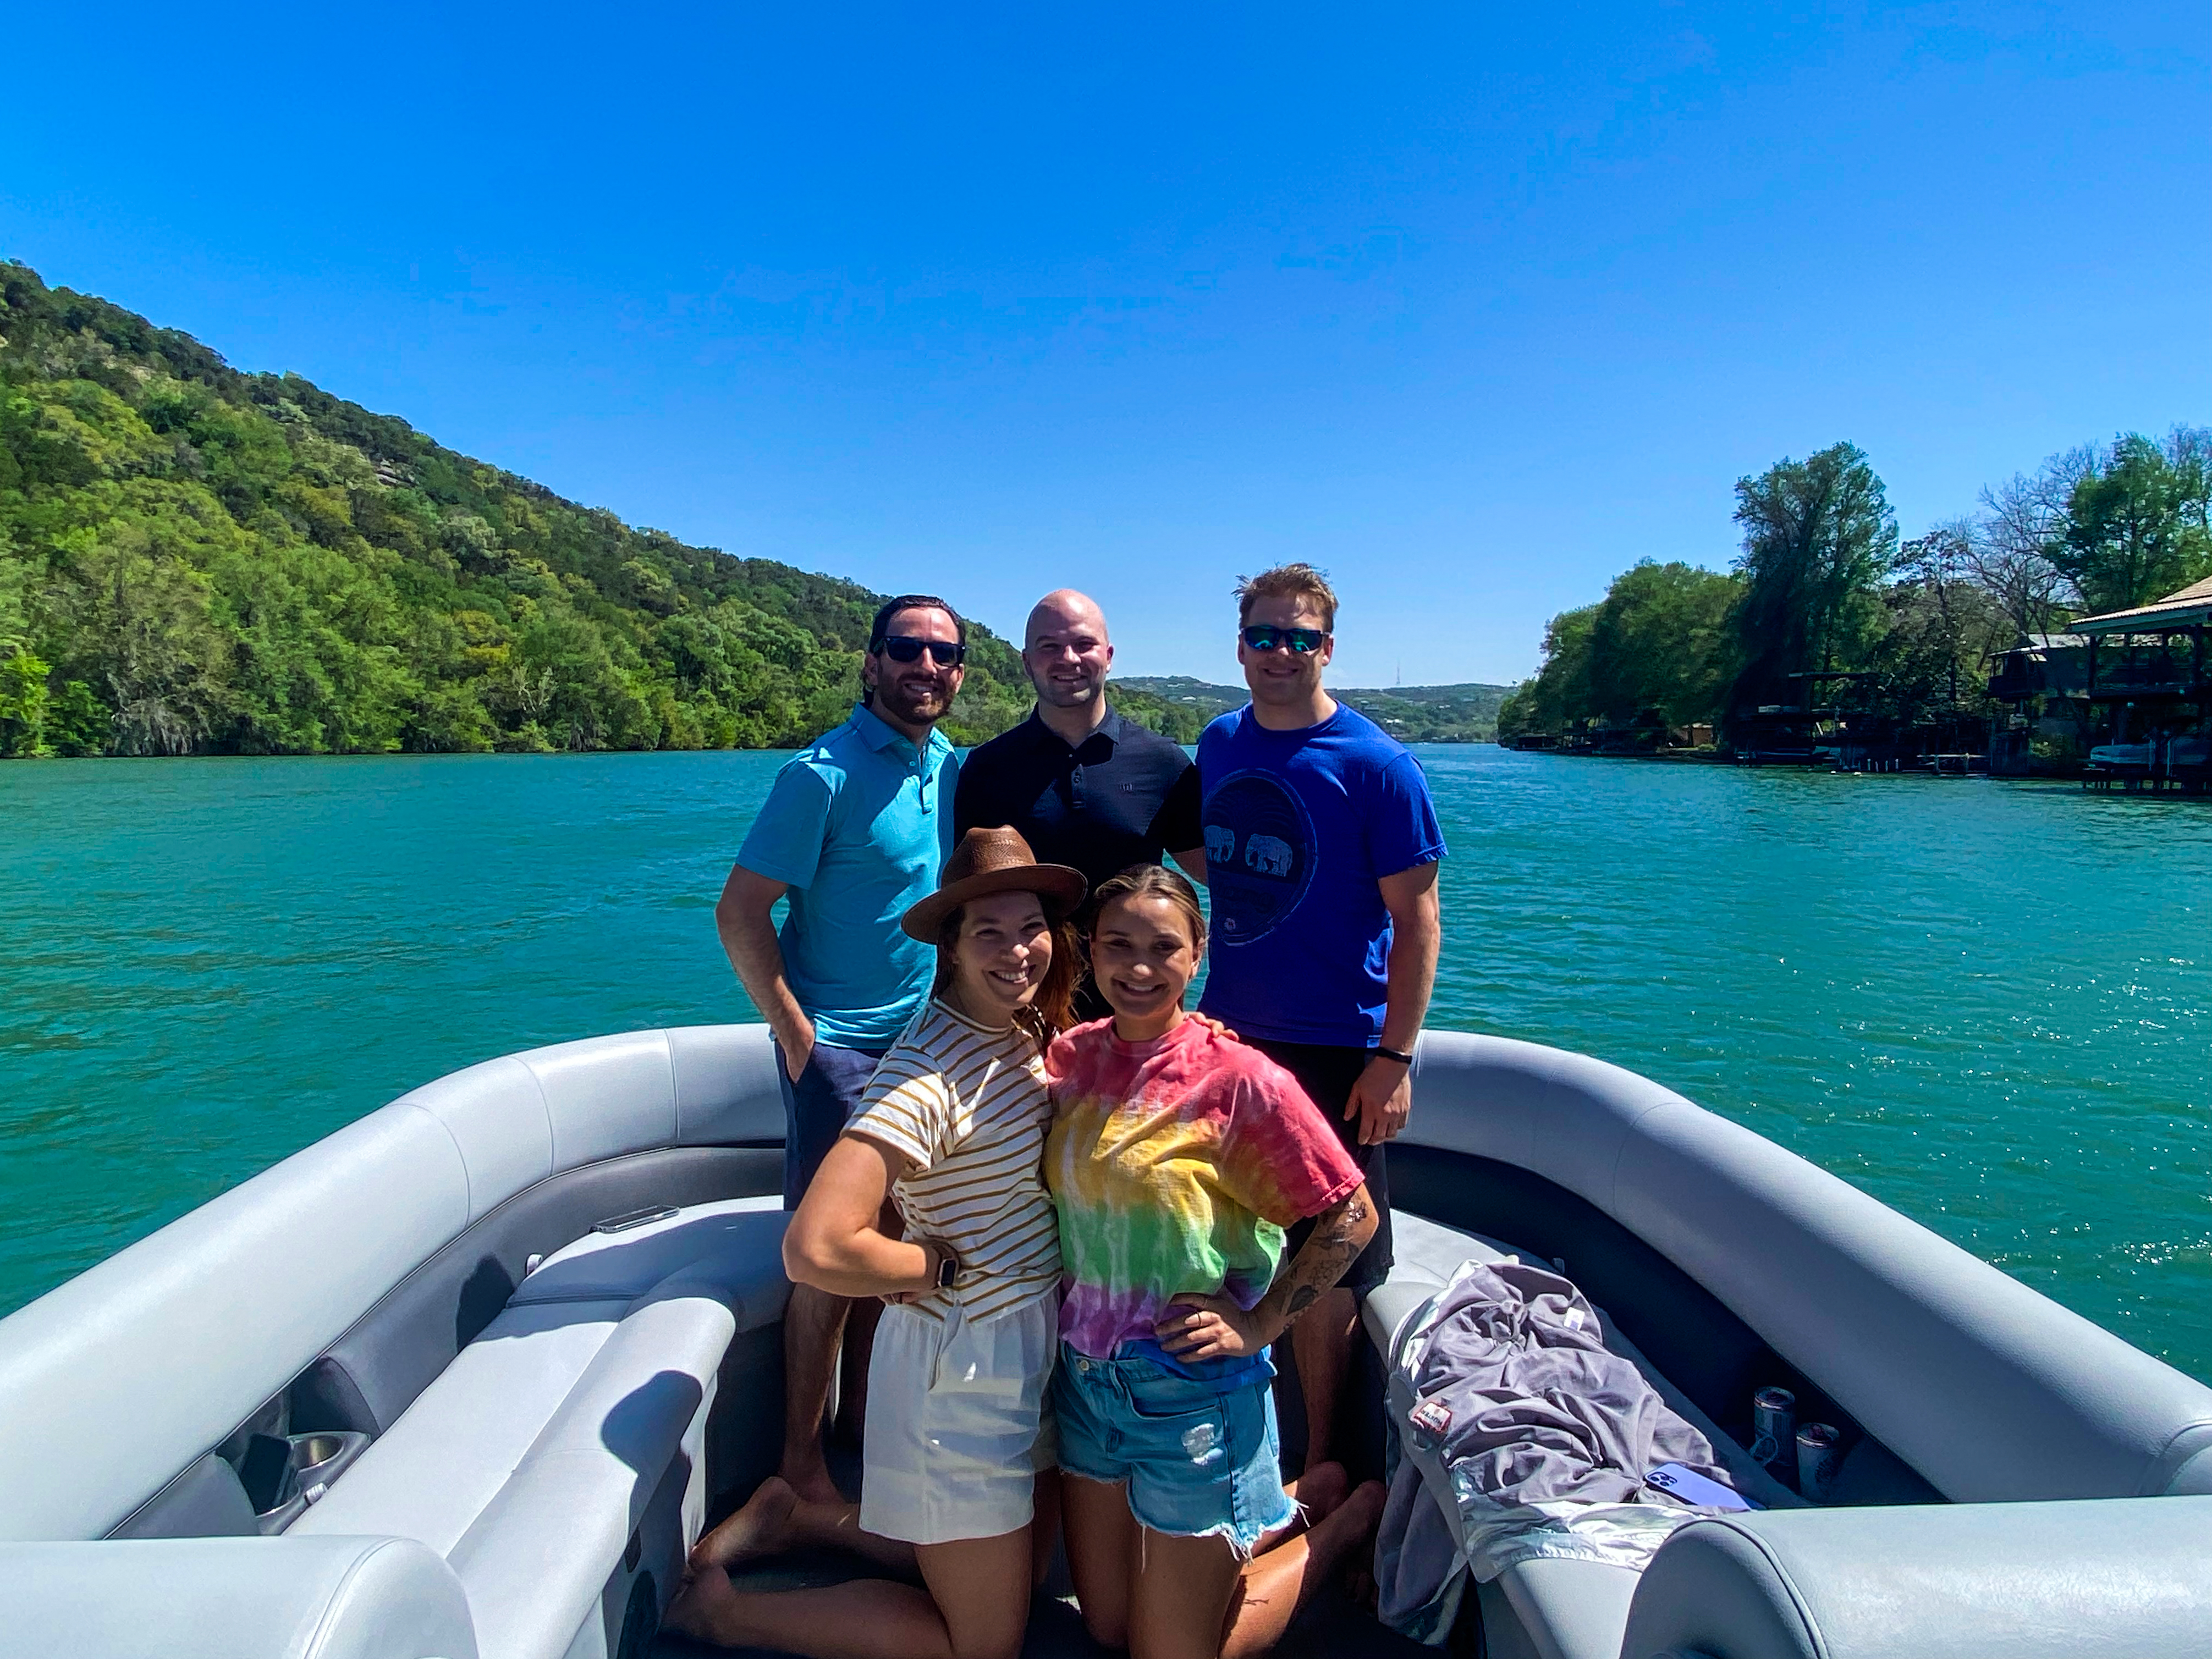 Captained boat rentals on Lake Austin